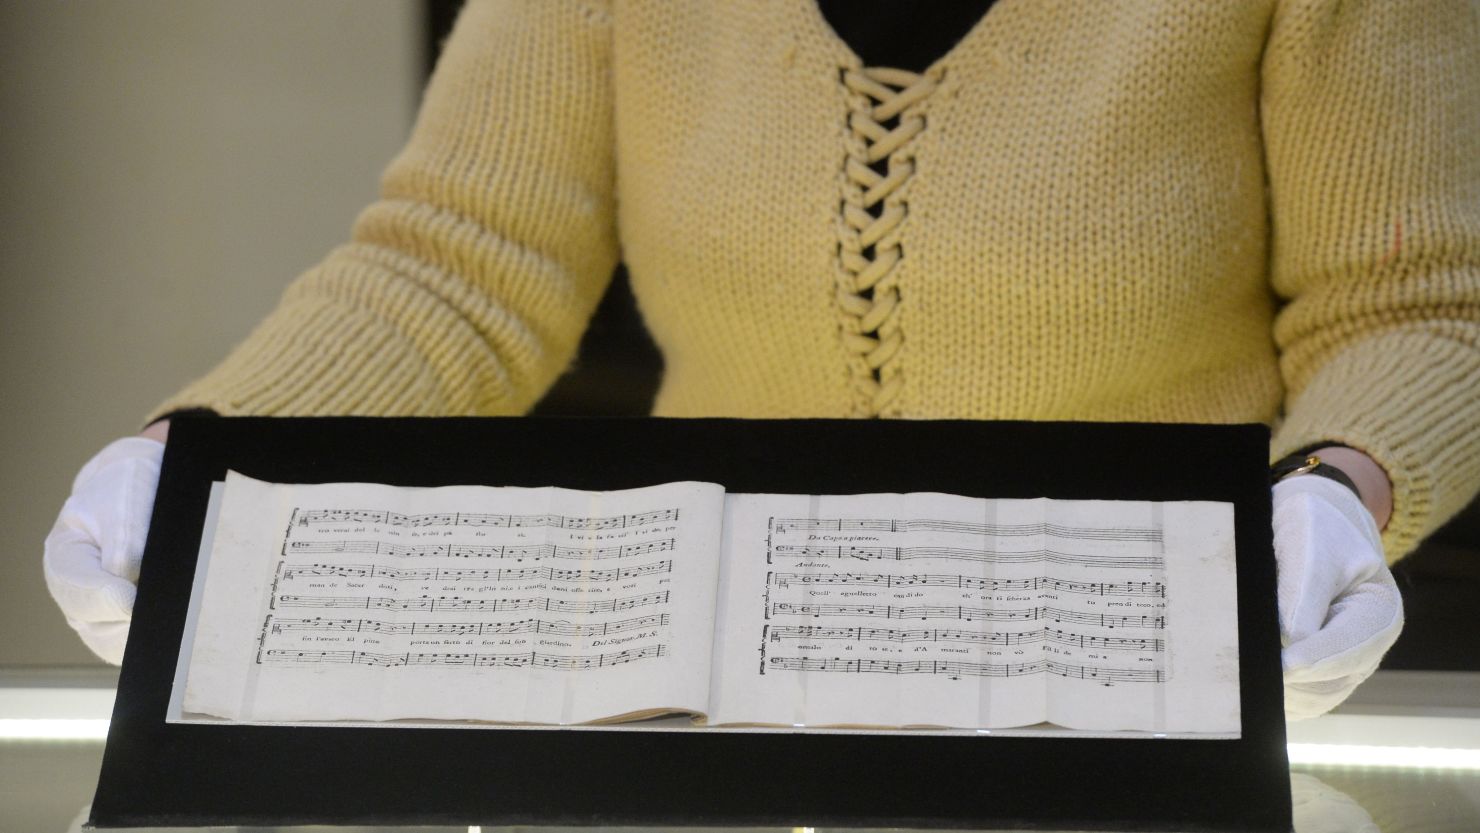 The newly-discovered sheets of music written by Austrian composer Wolfgang Amadeus Mozart.